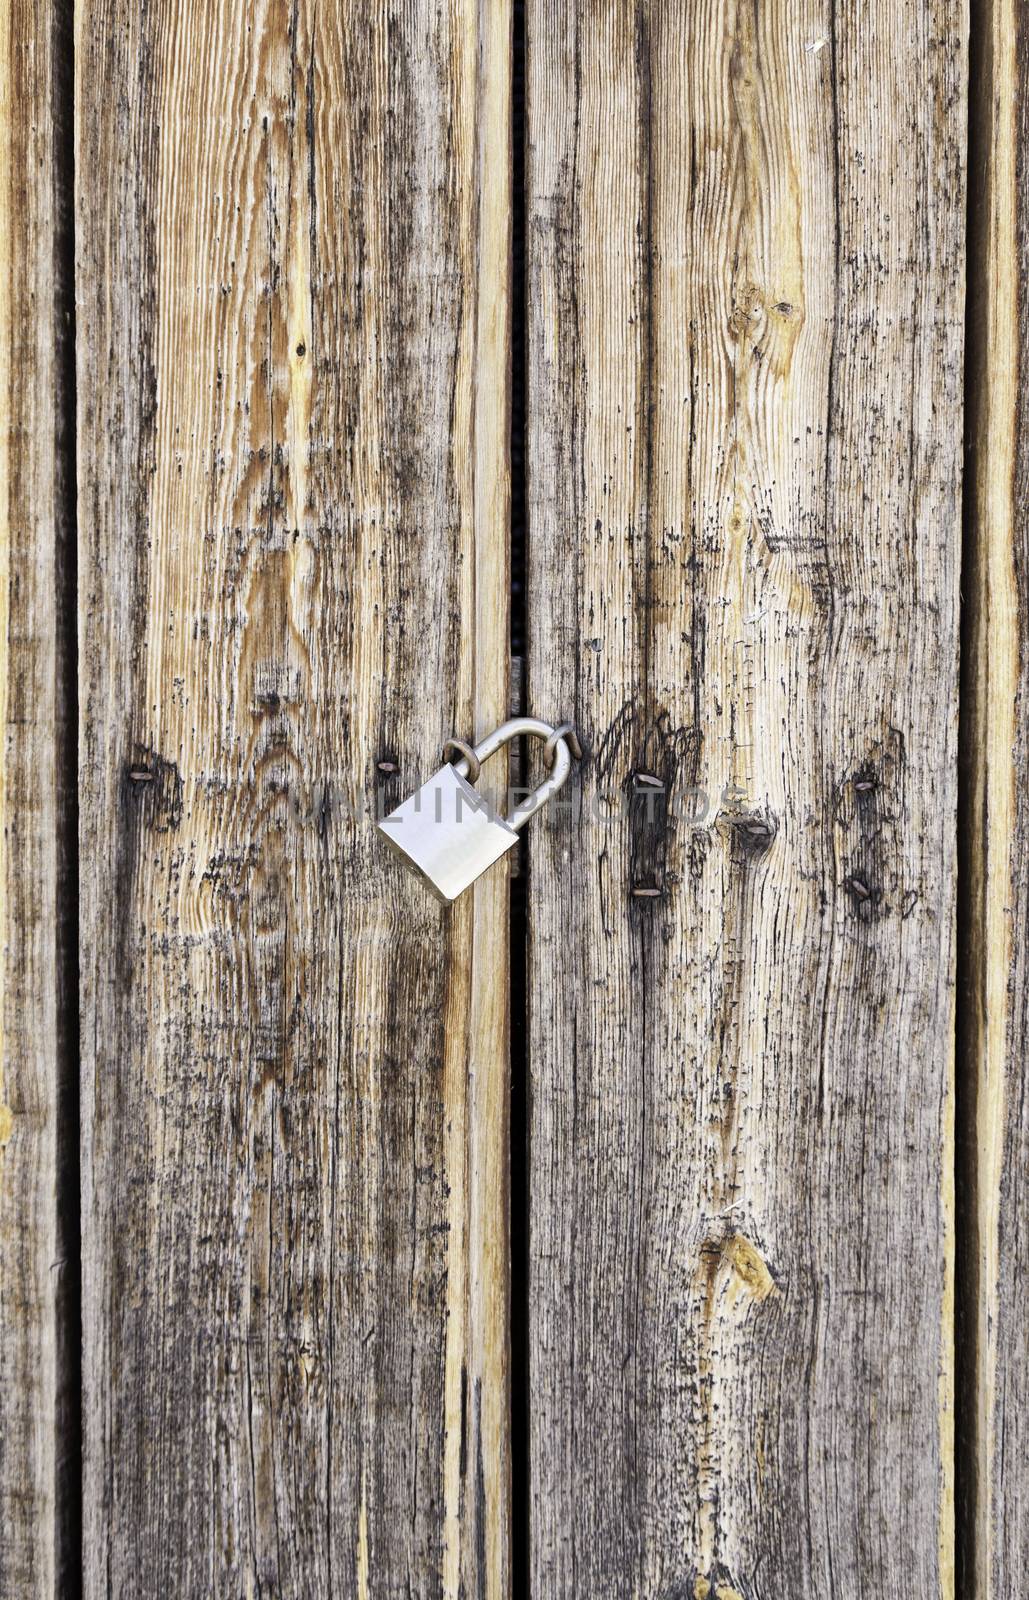 Wooden door locked with a padlock, detail of a textured, protection